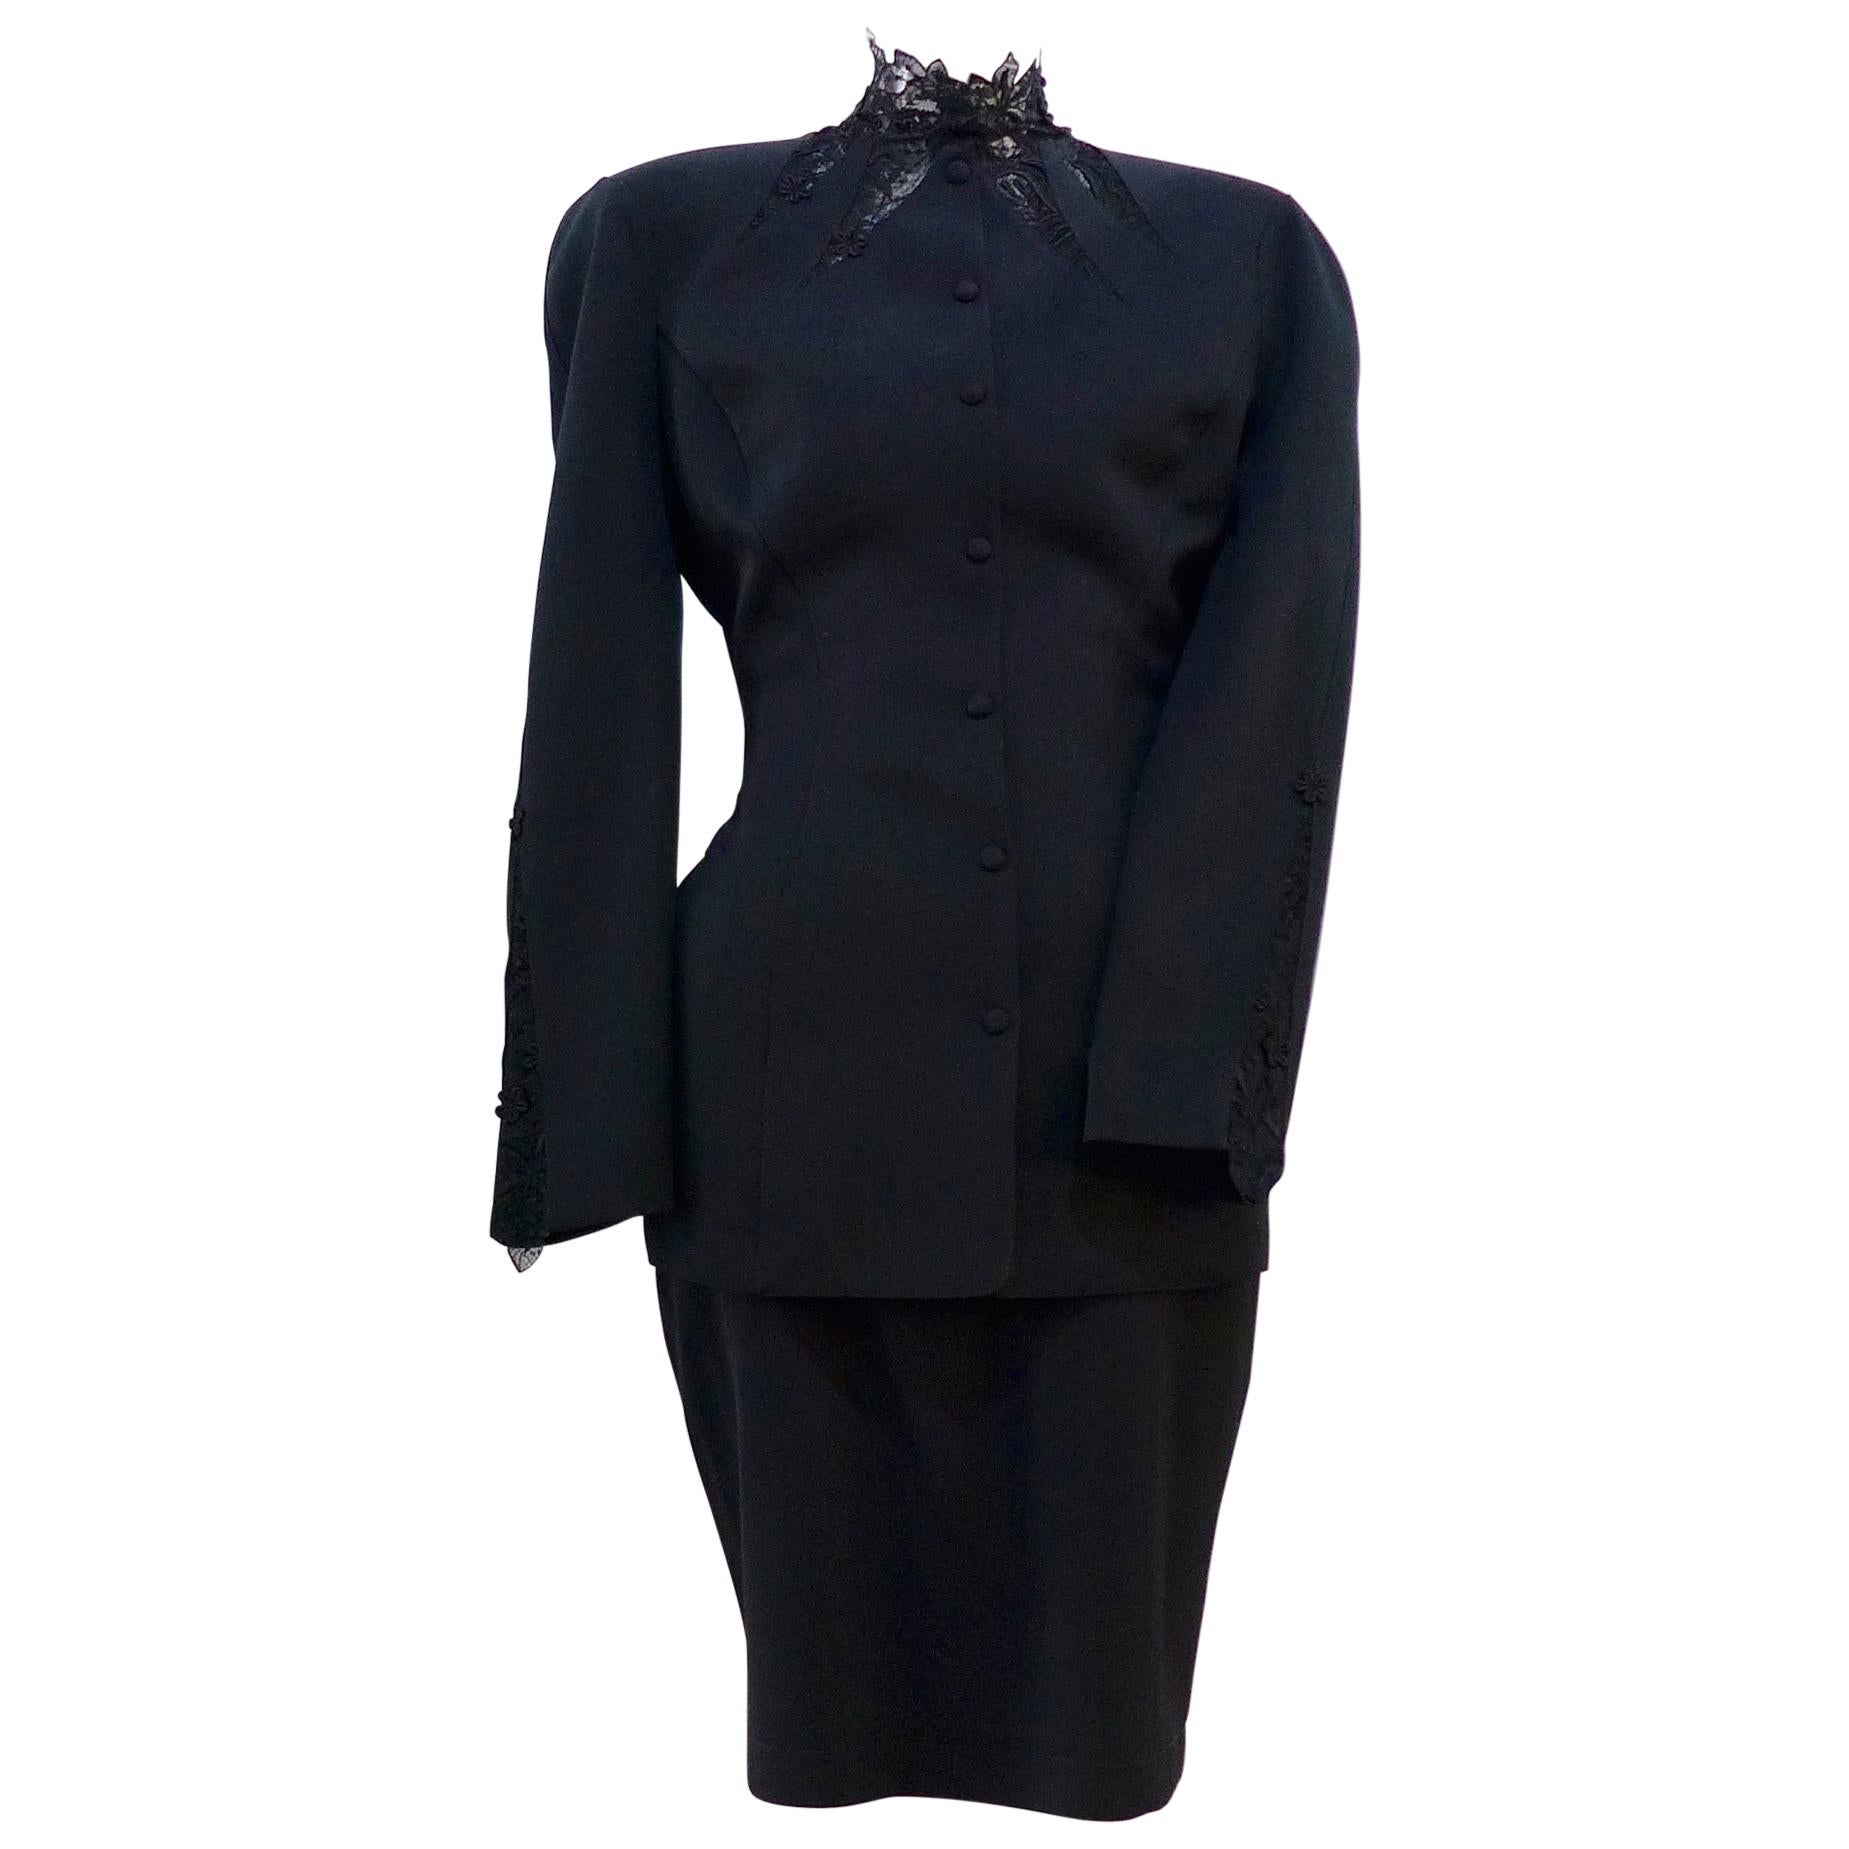 THIERRY MUGLER Black Skirt Suit With Lace Details Size 40 For Sale